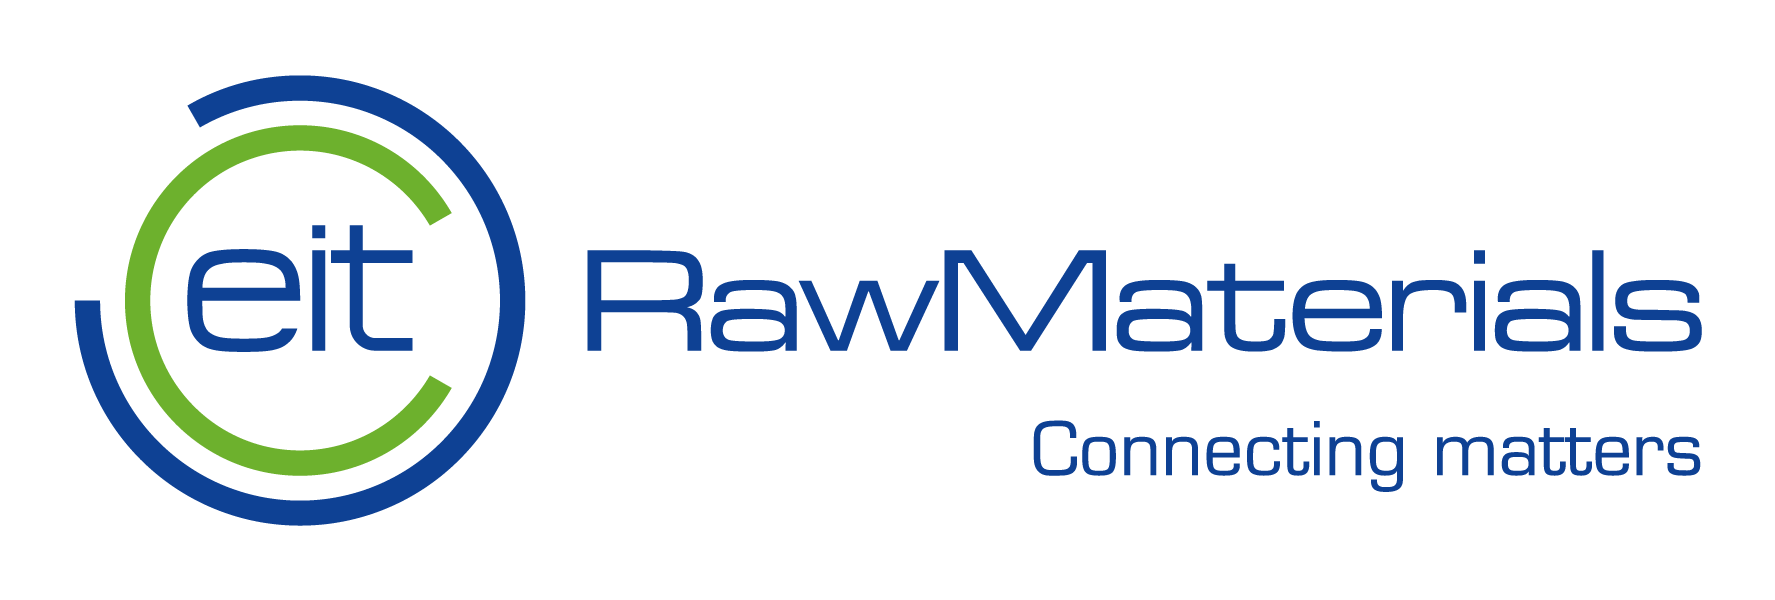 EIT RawMaterials. Connecting matters